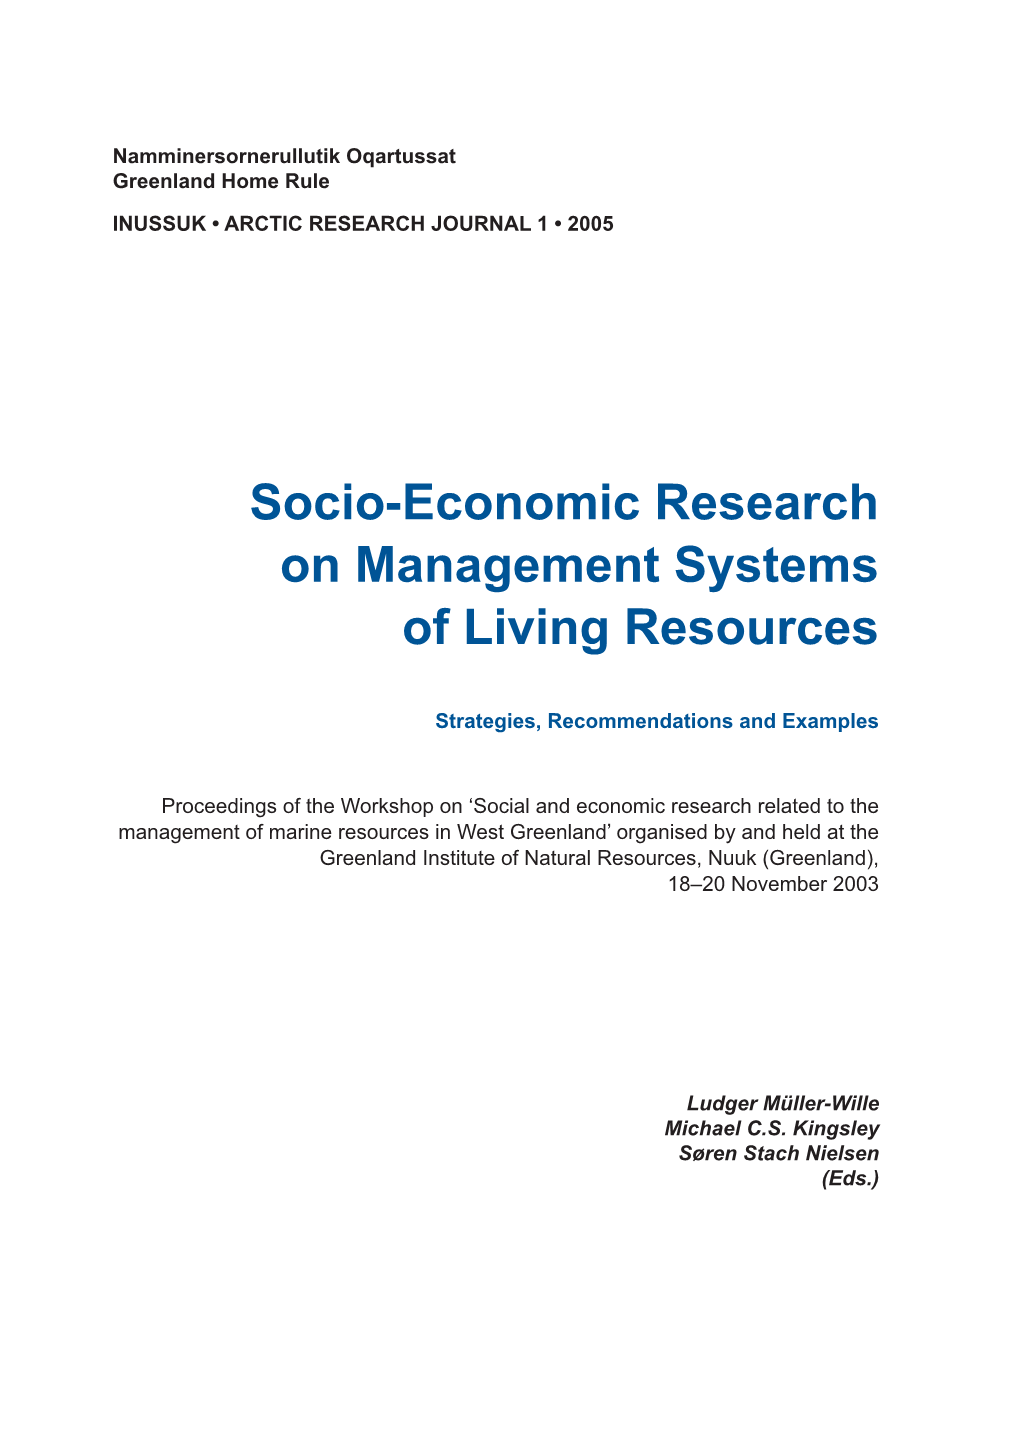 Socio-Economic Research on Management Systems of Living Resources